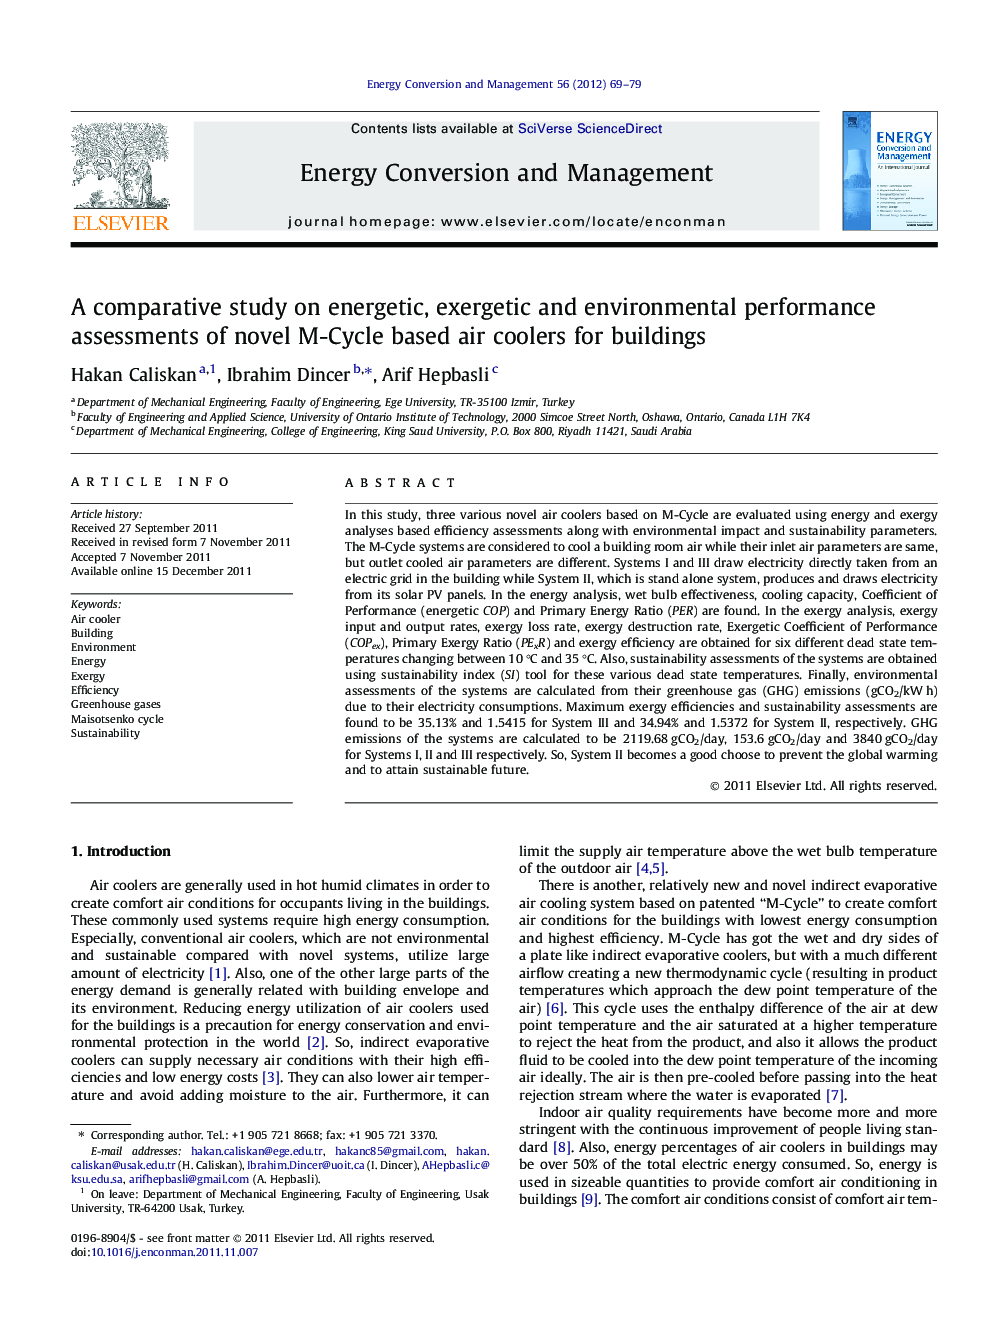 A comparative study on energetic, exergetic and environmental performance assessments of novel M-Cycle based air coolers for buildings